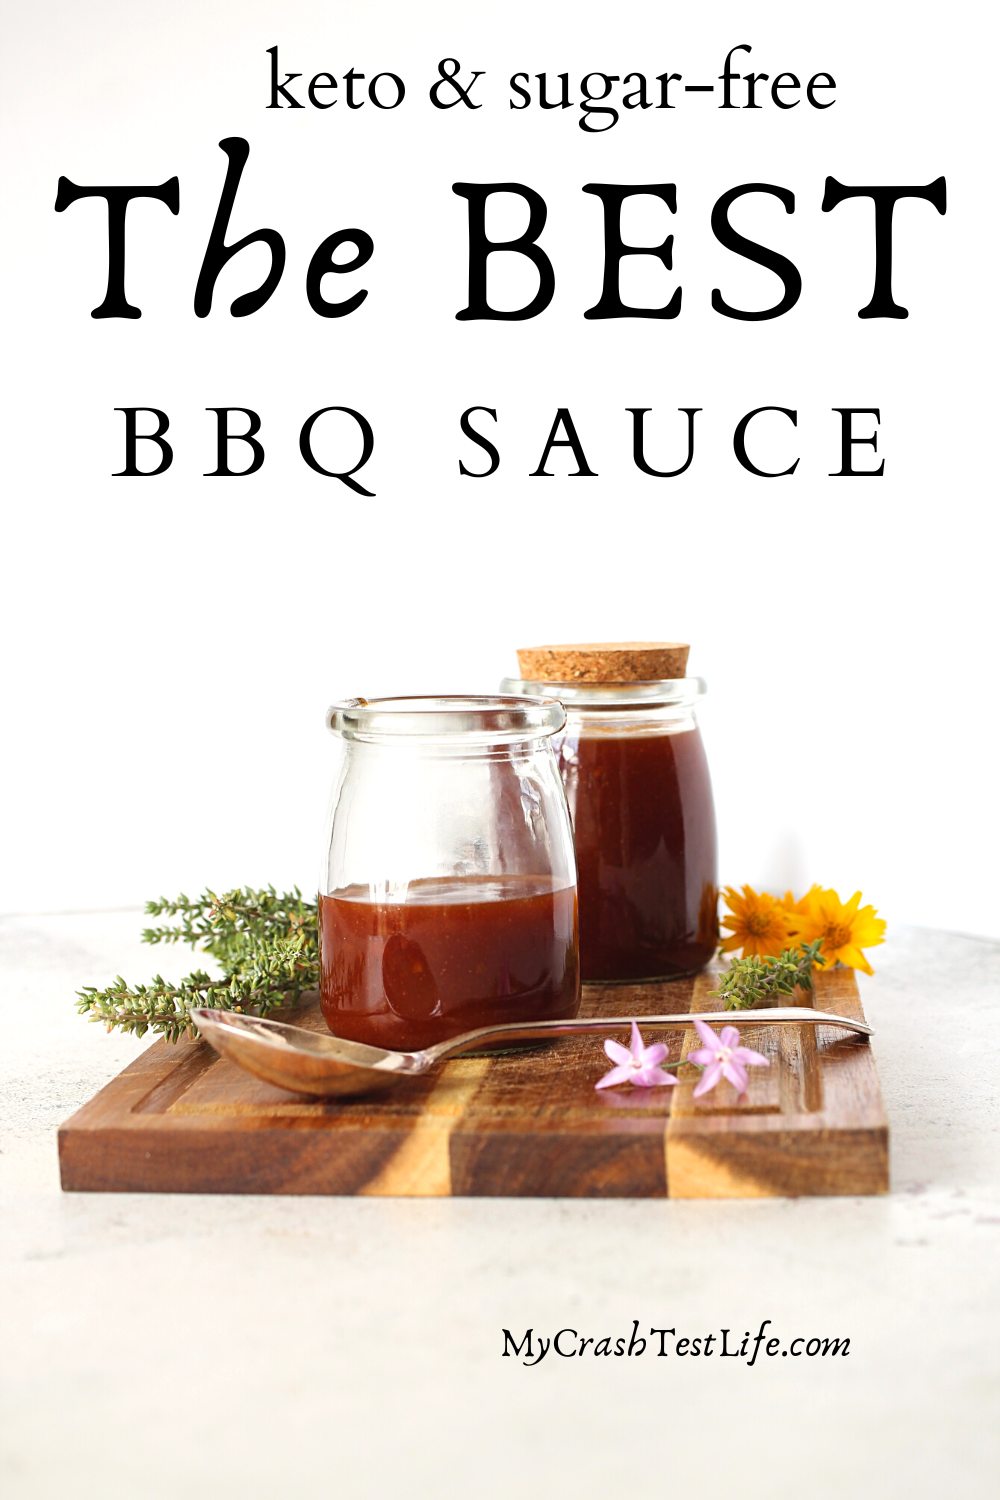 the best homemade sugar-free BBQ sauce recipe starts with simple keto ingredients